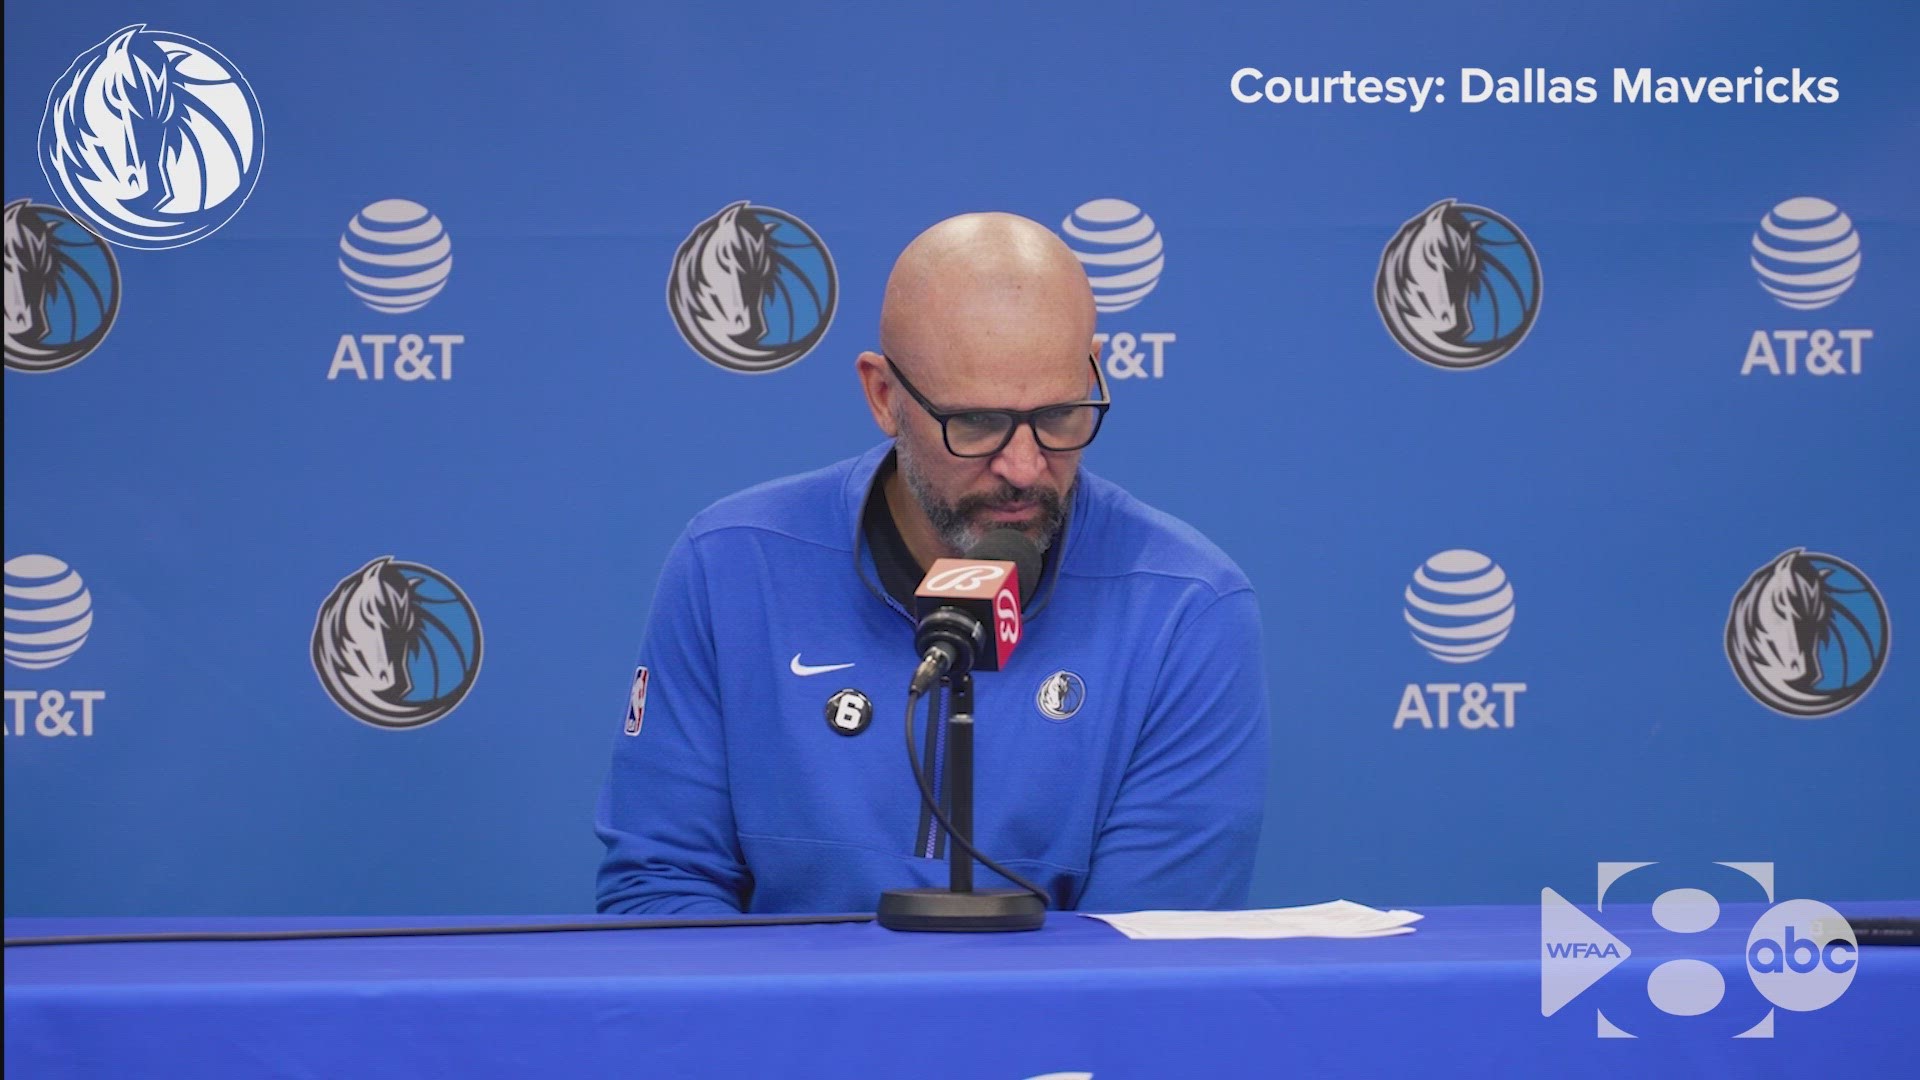 Jason Kidd, Luka Doncic and Kyrie Irving speak to the media after falling 117-109 to the undermanned Charlotte Hornets.